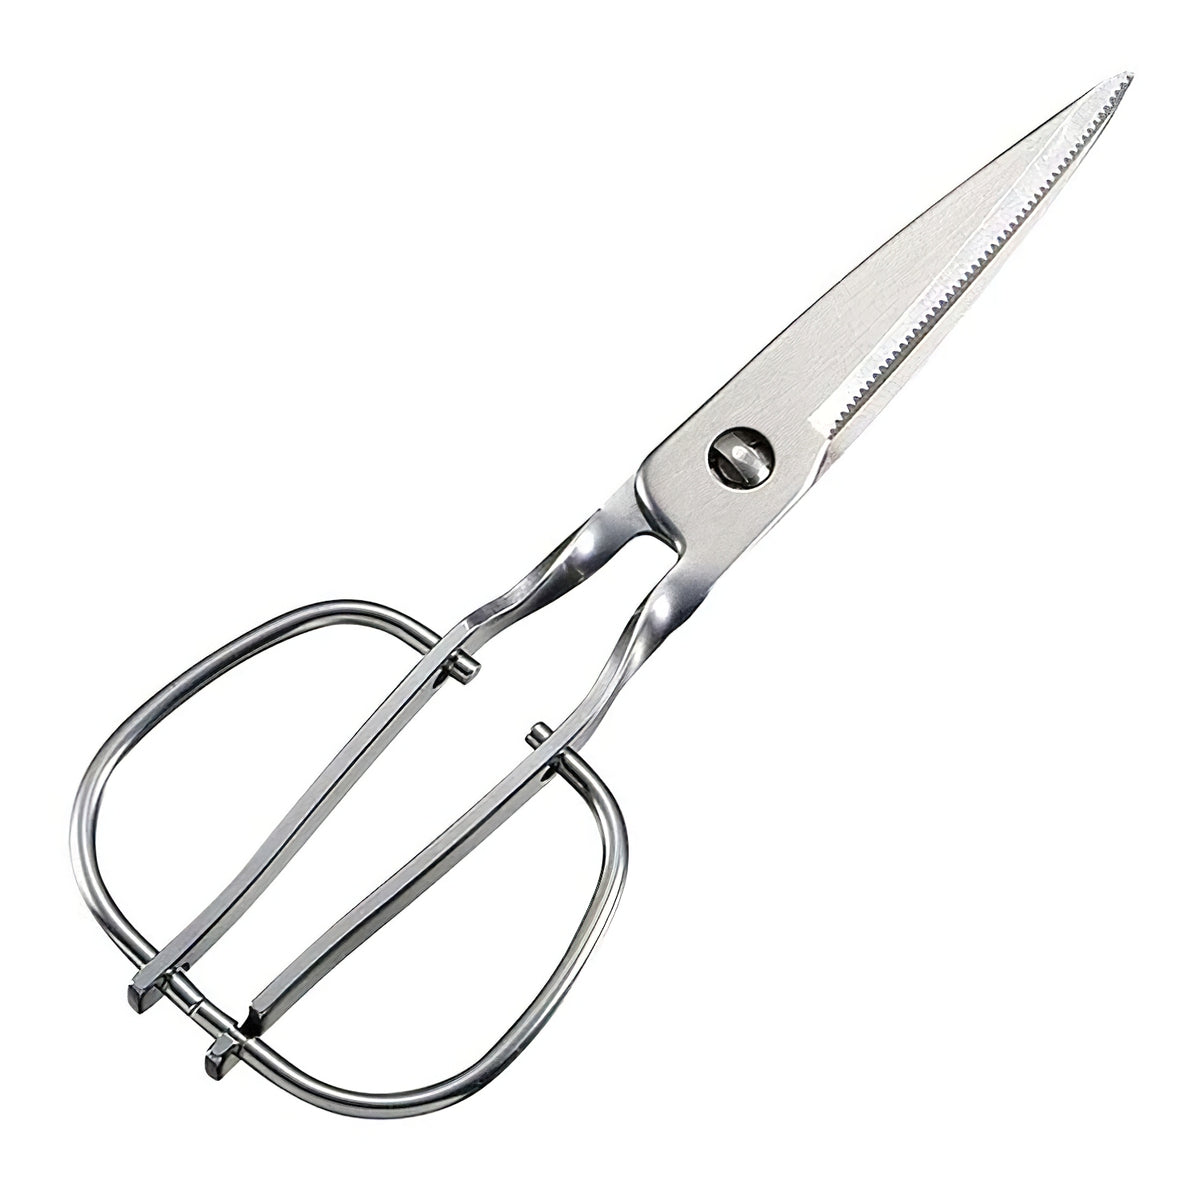 Vegetable cutting scissors: 2023's 10 must-haves